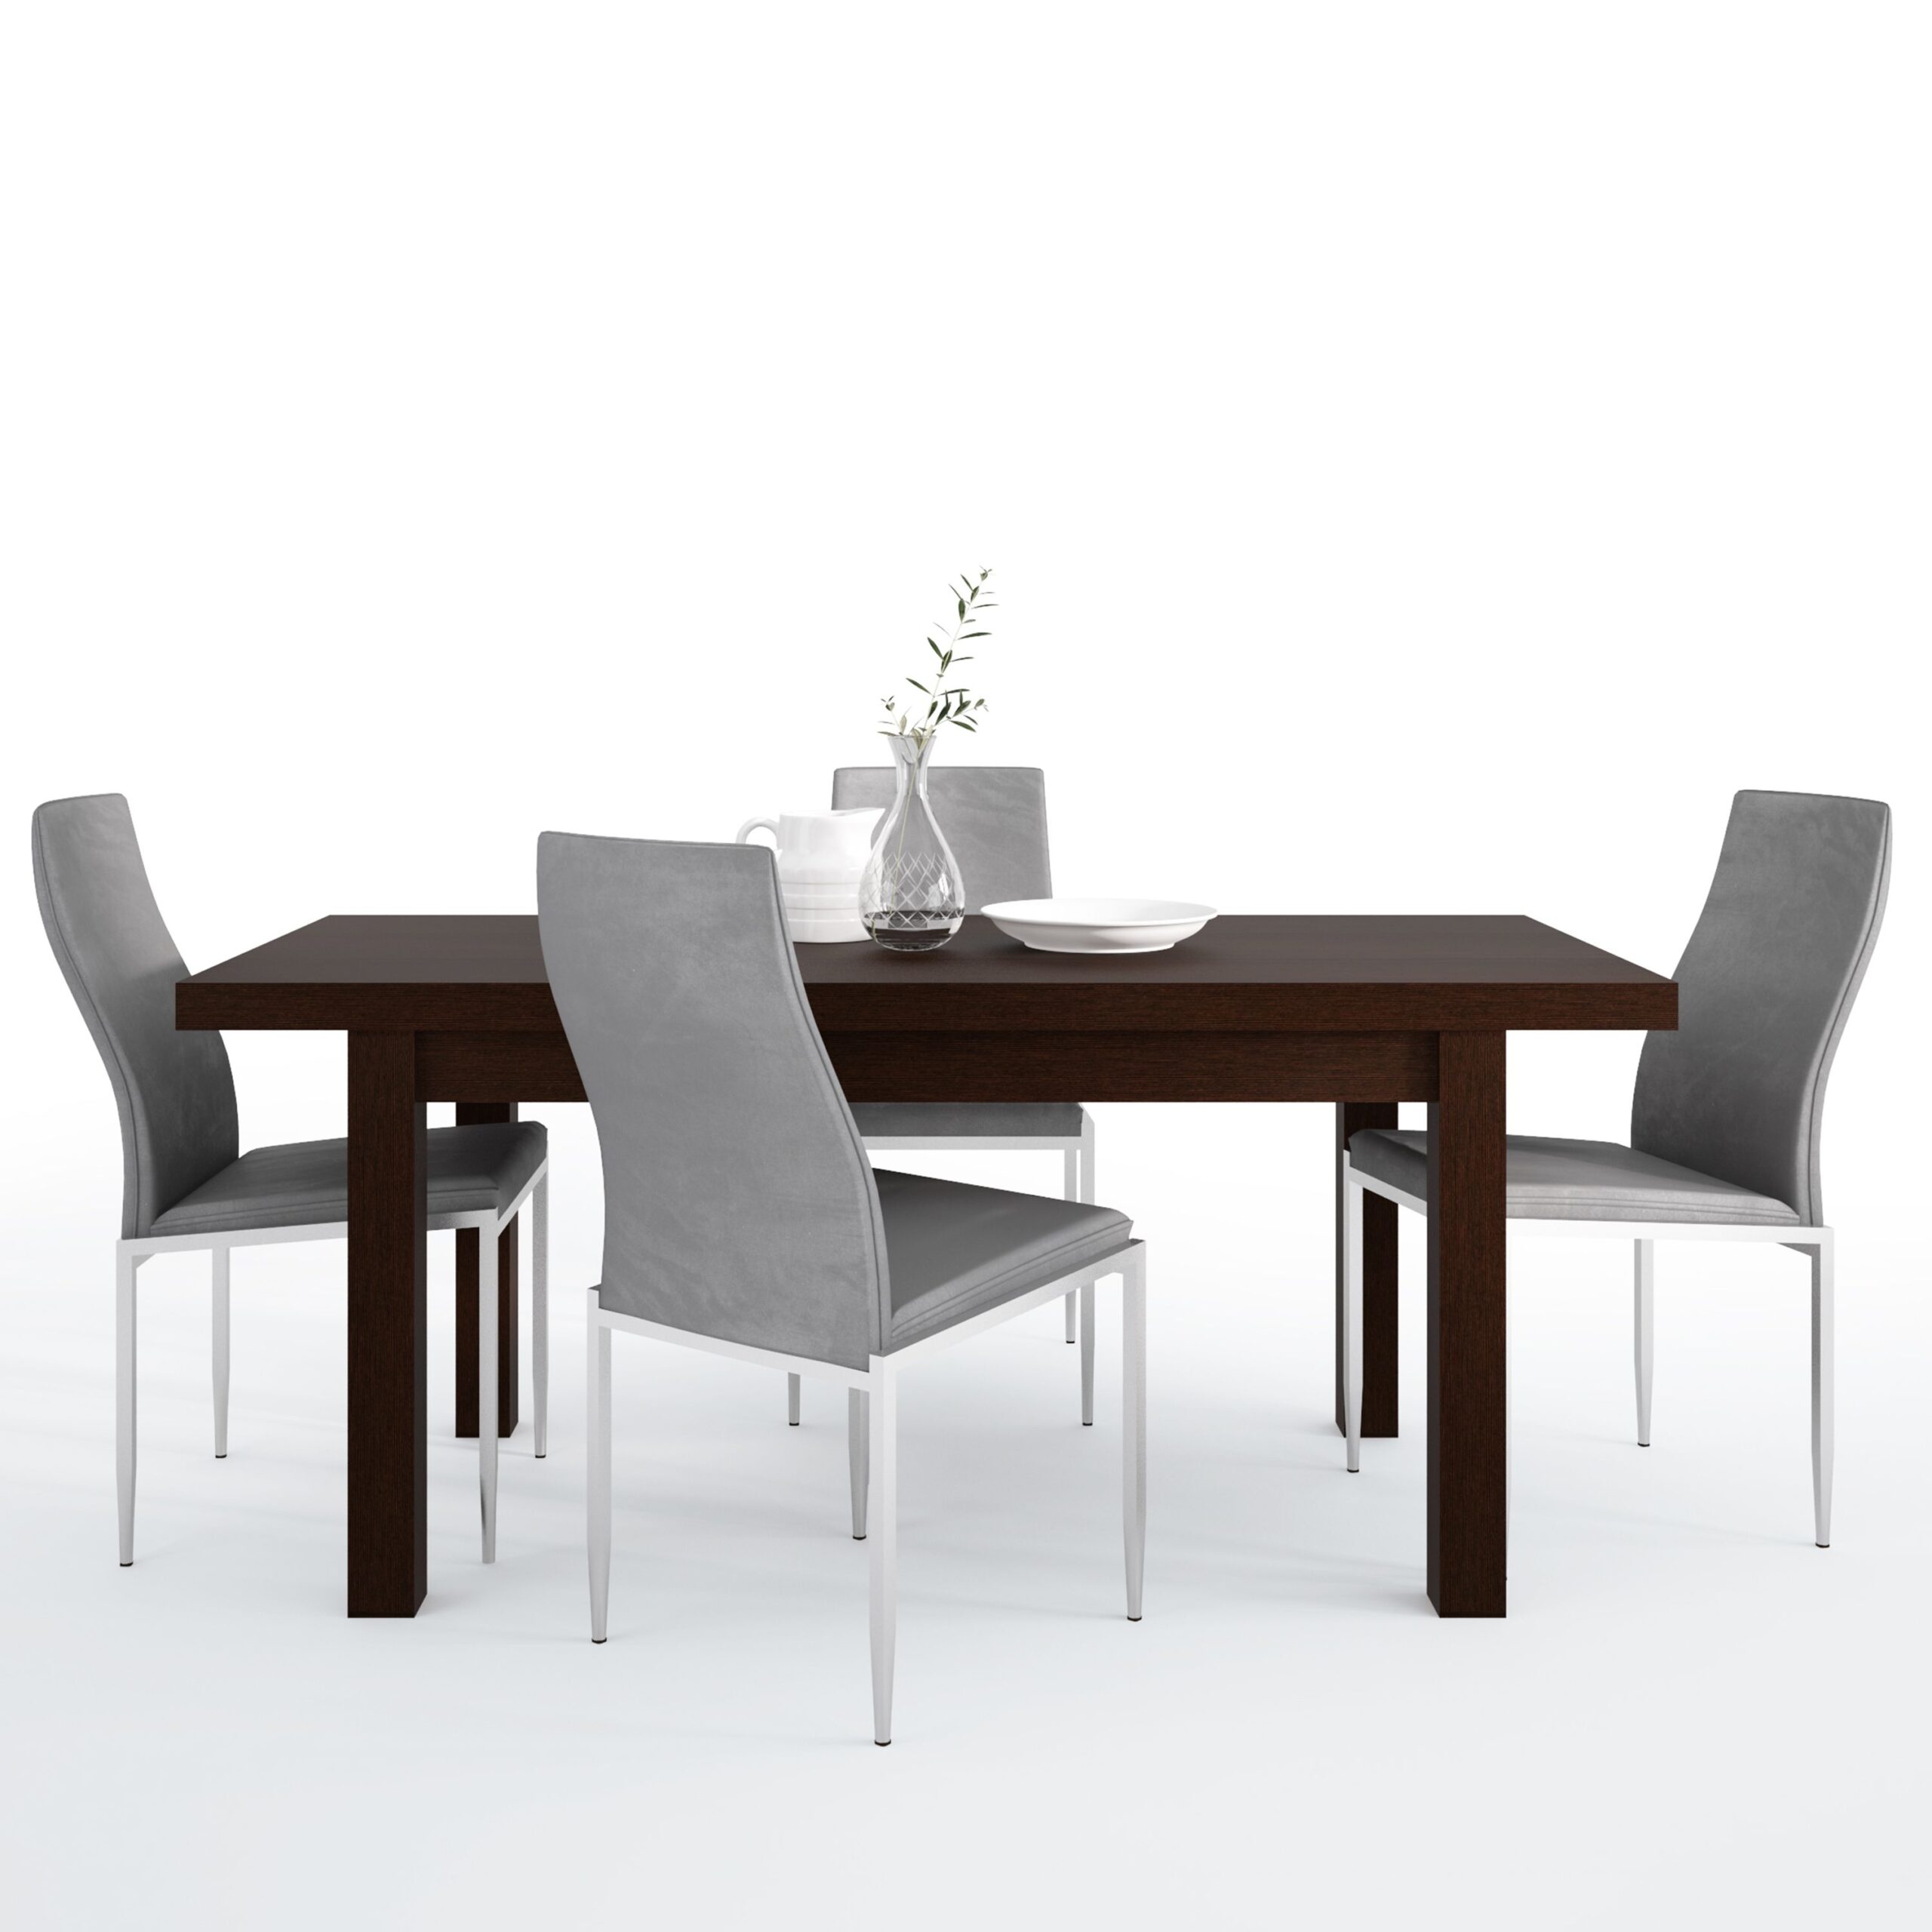 Jello Dining set package Jello Extending Dining Table in Dark Mahogany + 6 Lillie High Back Chair Grey